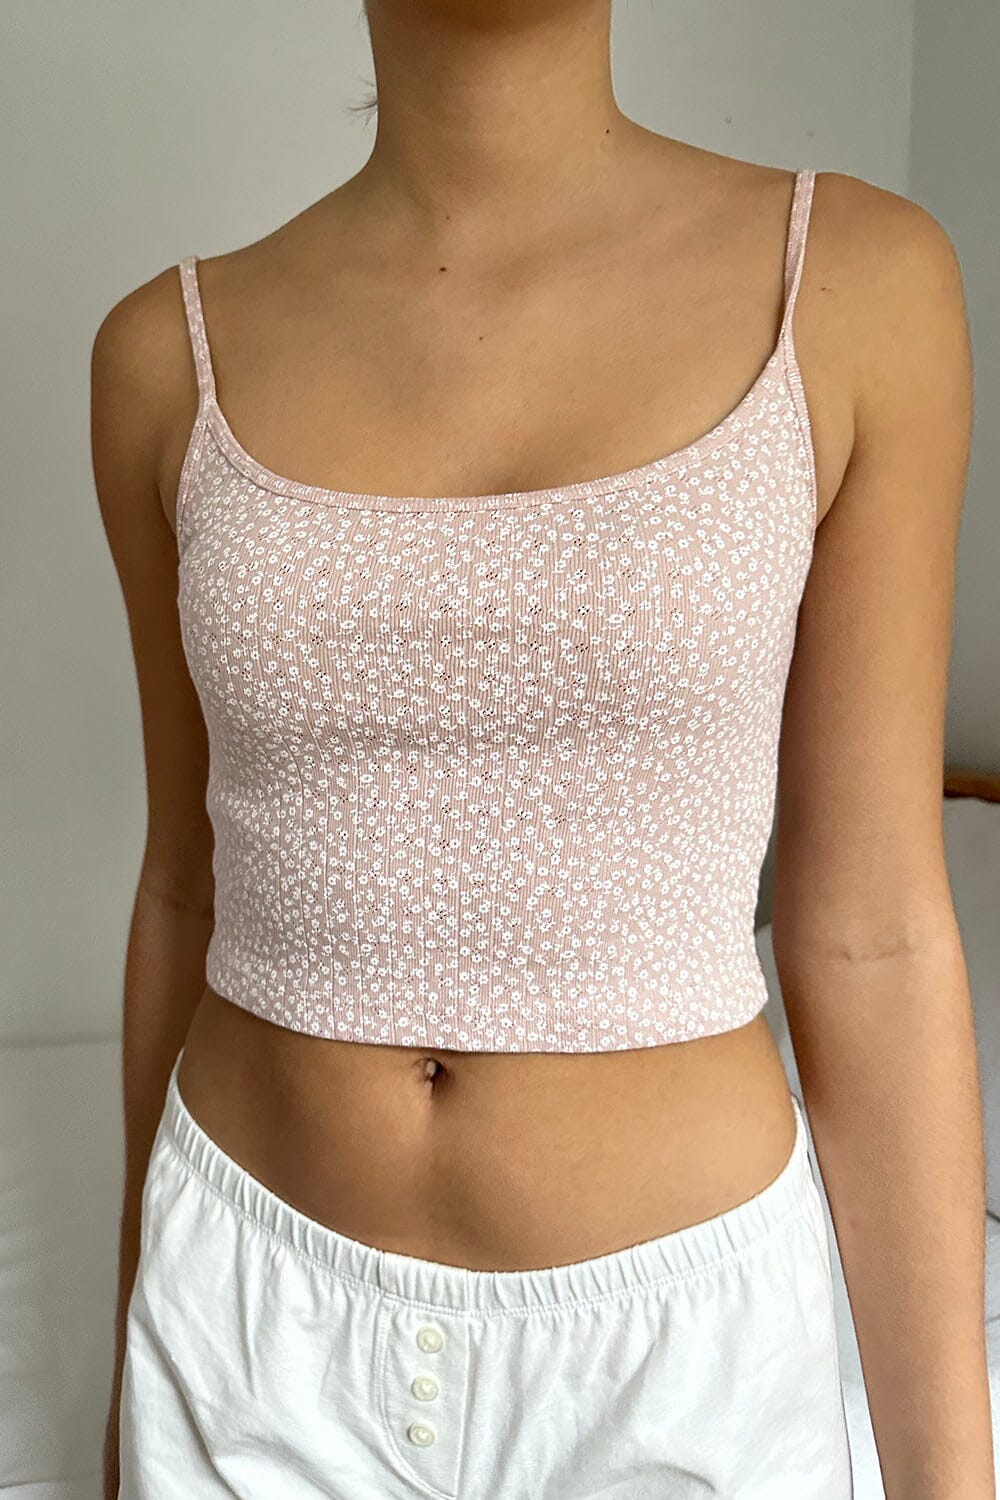 Brandy Melville Floral Crop Top Size undefined - $10 - From Claire